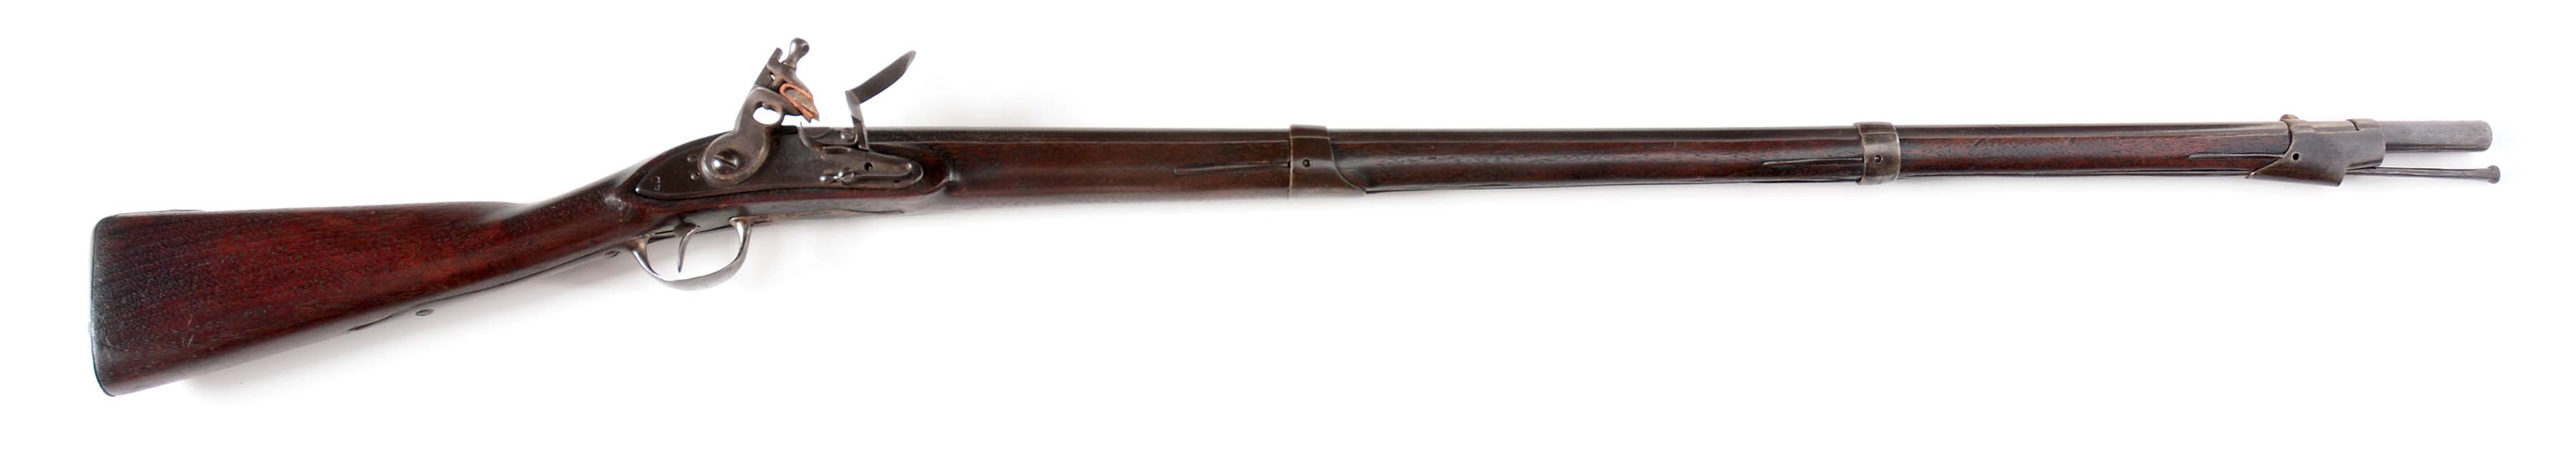 (A) 1797 JOHN YOUNG "CP" MUSKET.